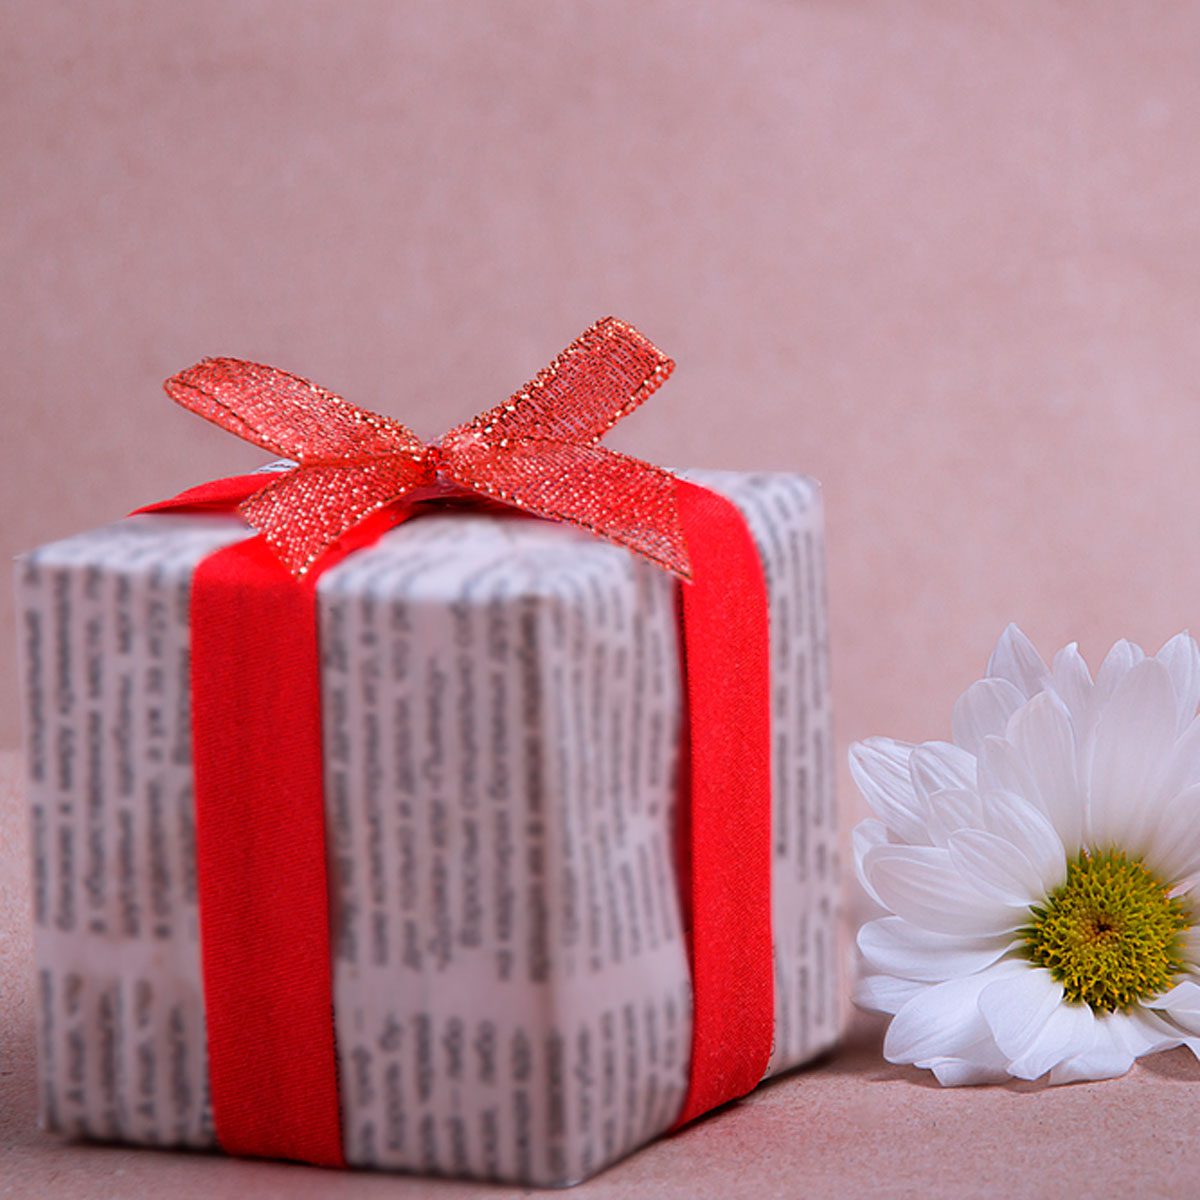 Gift box wrapped in craft paper with a note in the form of a red